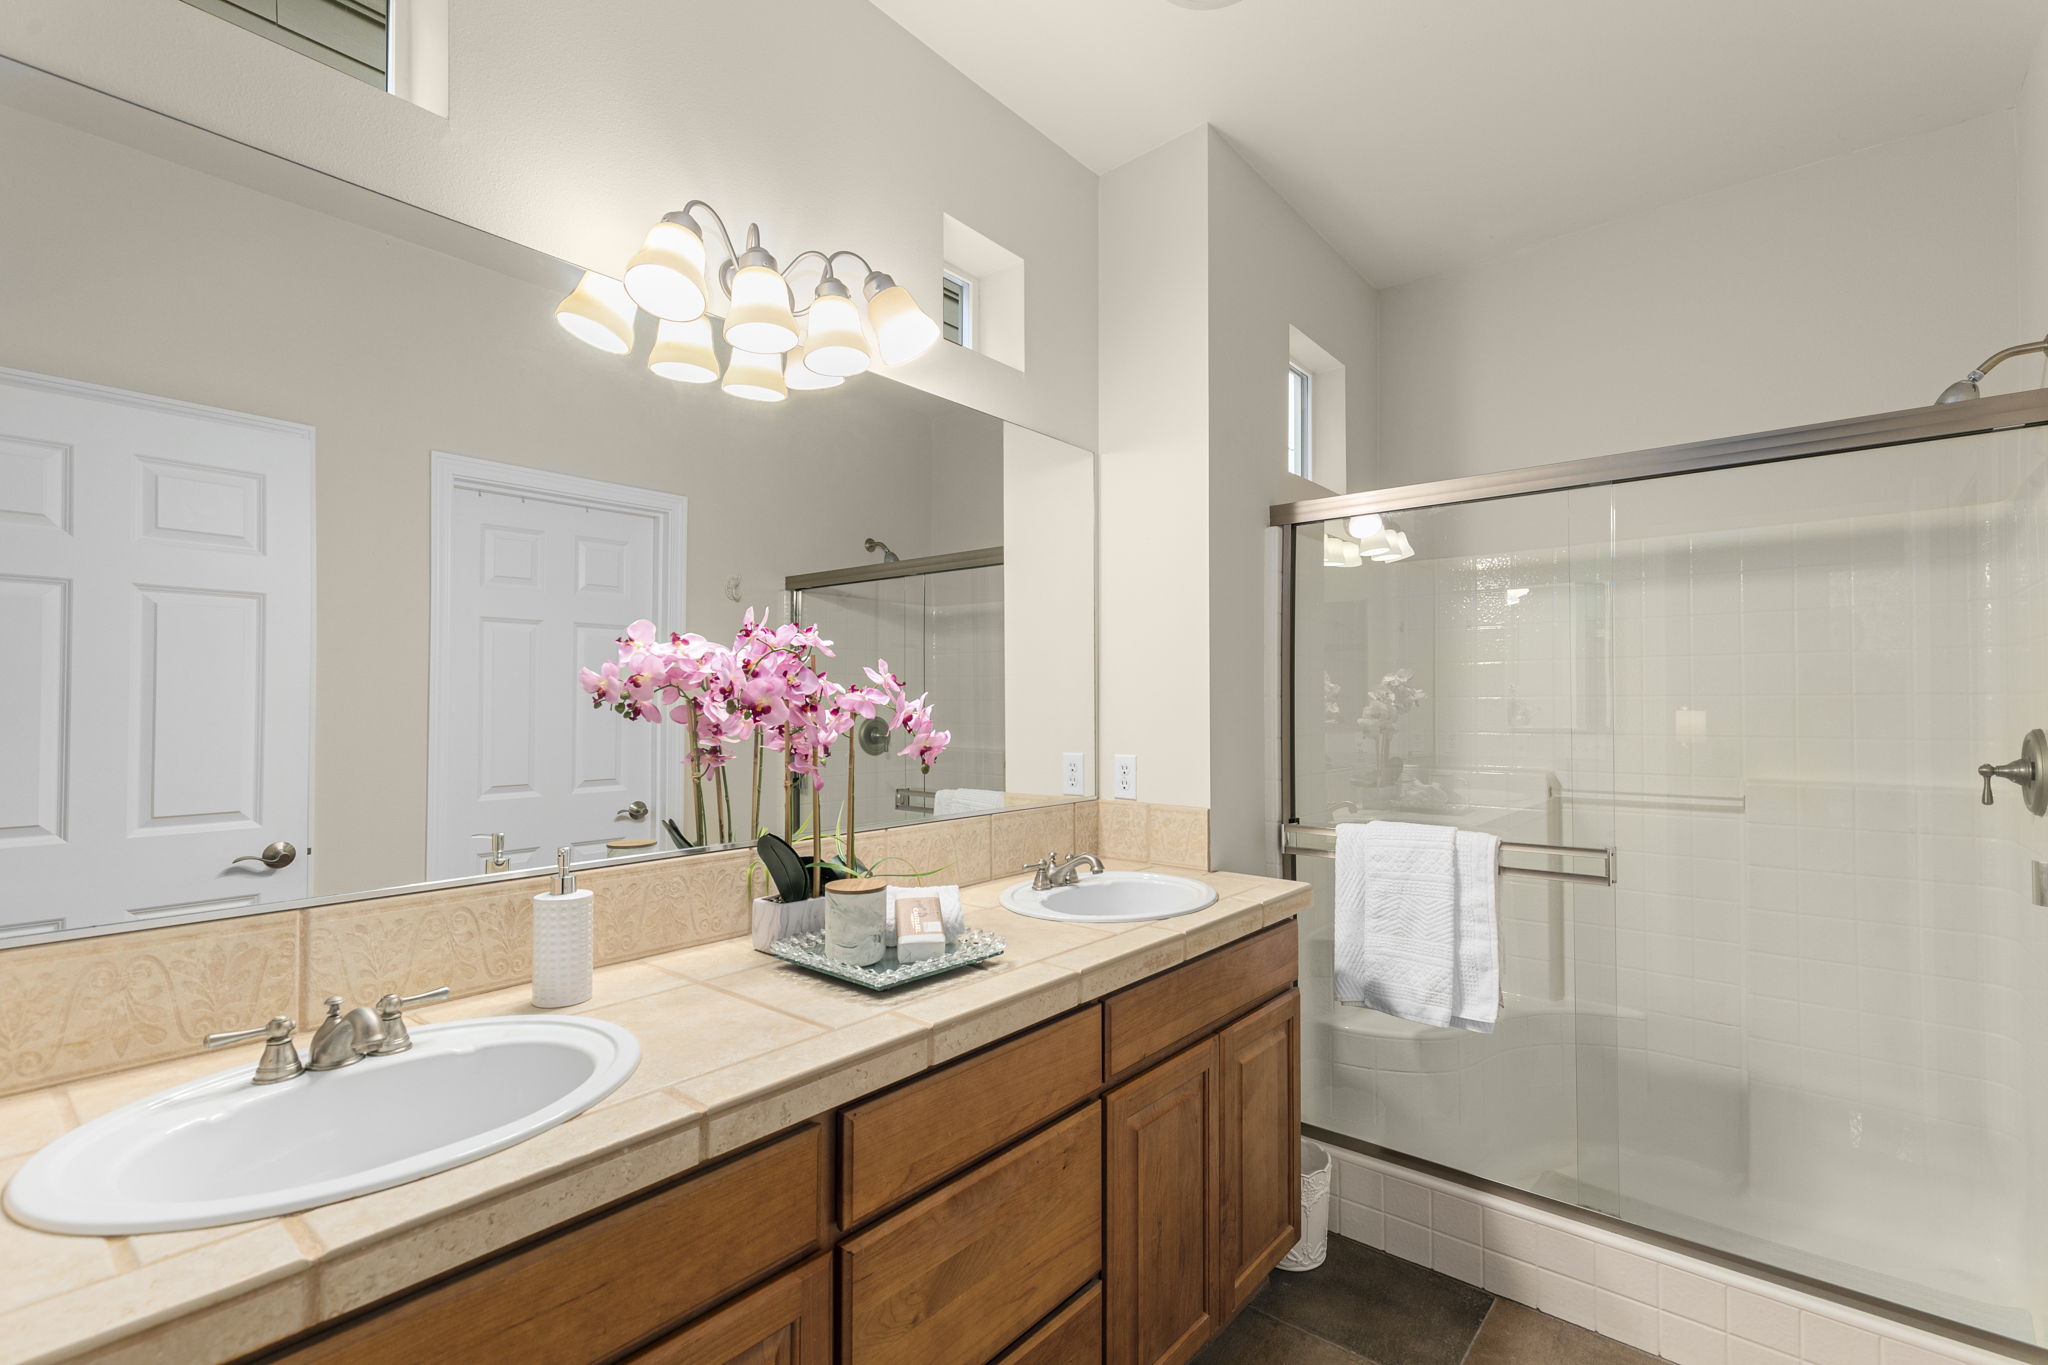 Dual vanity and low-step shower, large walk-in closet and WC.